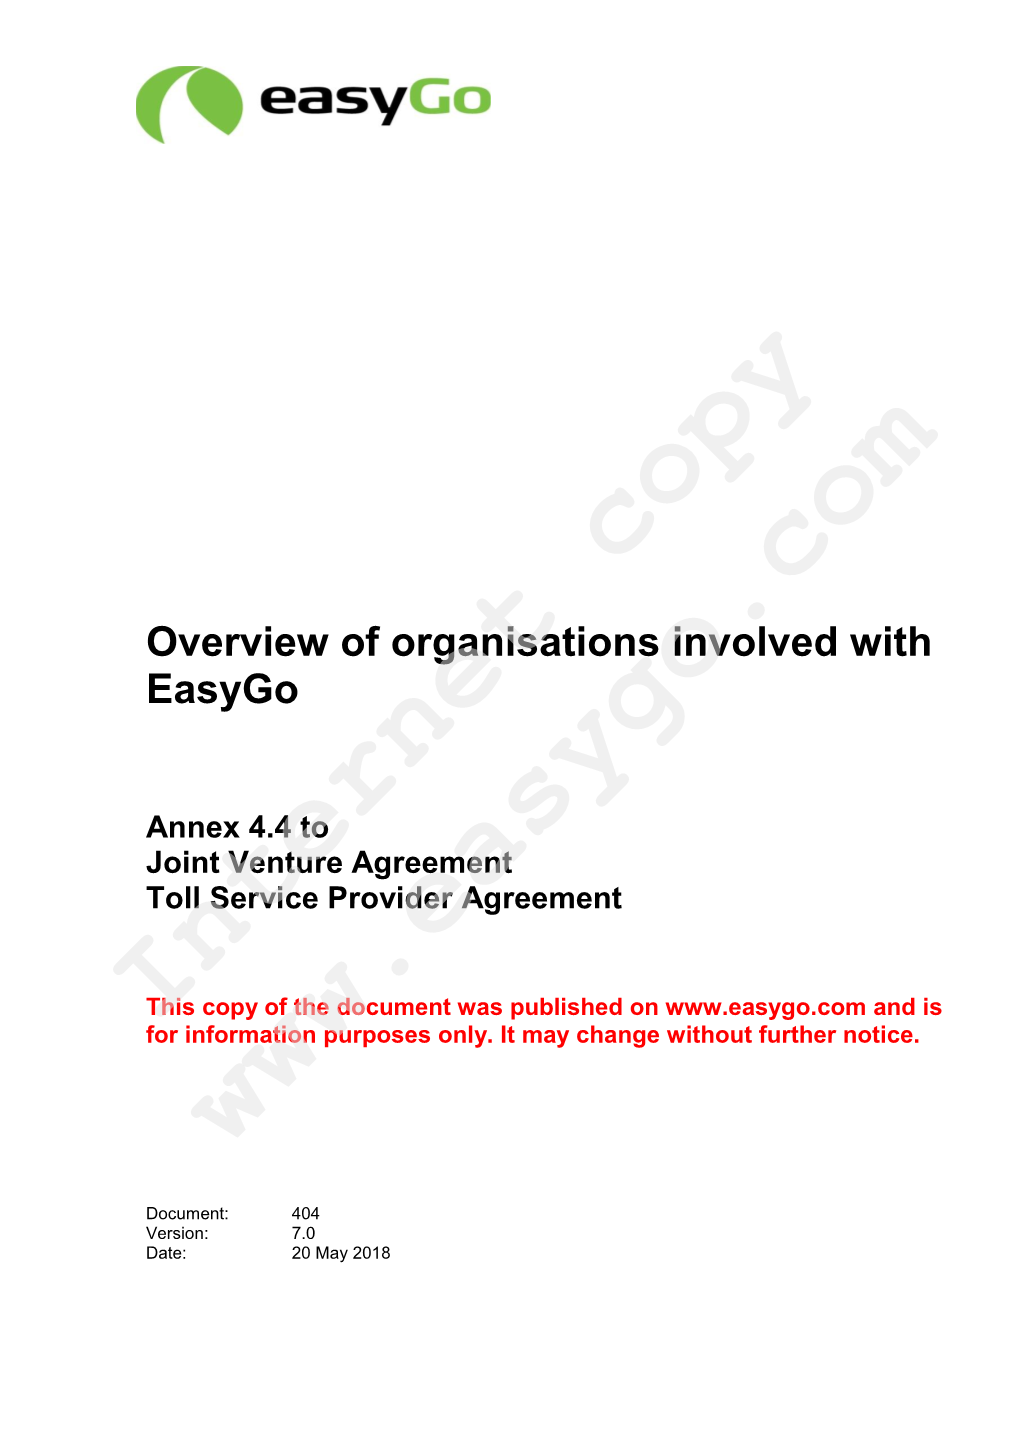 Overview of Organisations Involved with Easygo